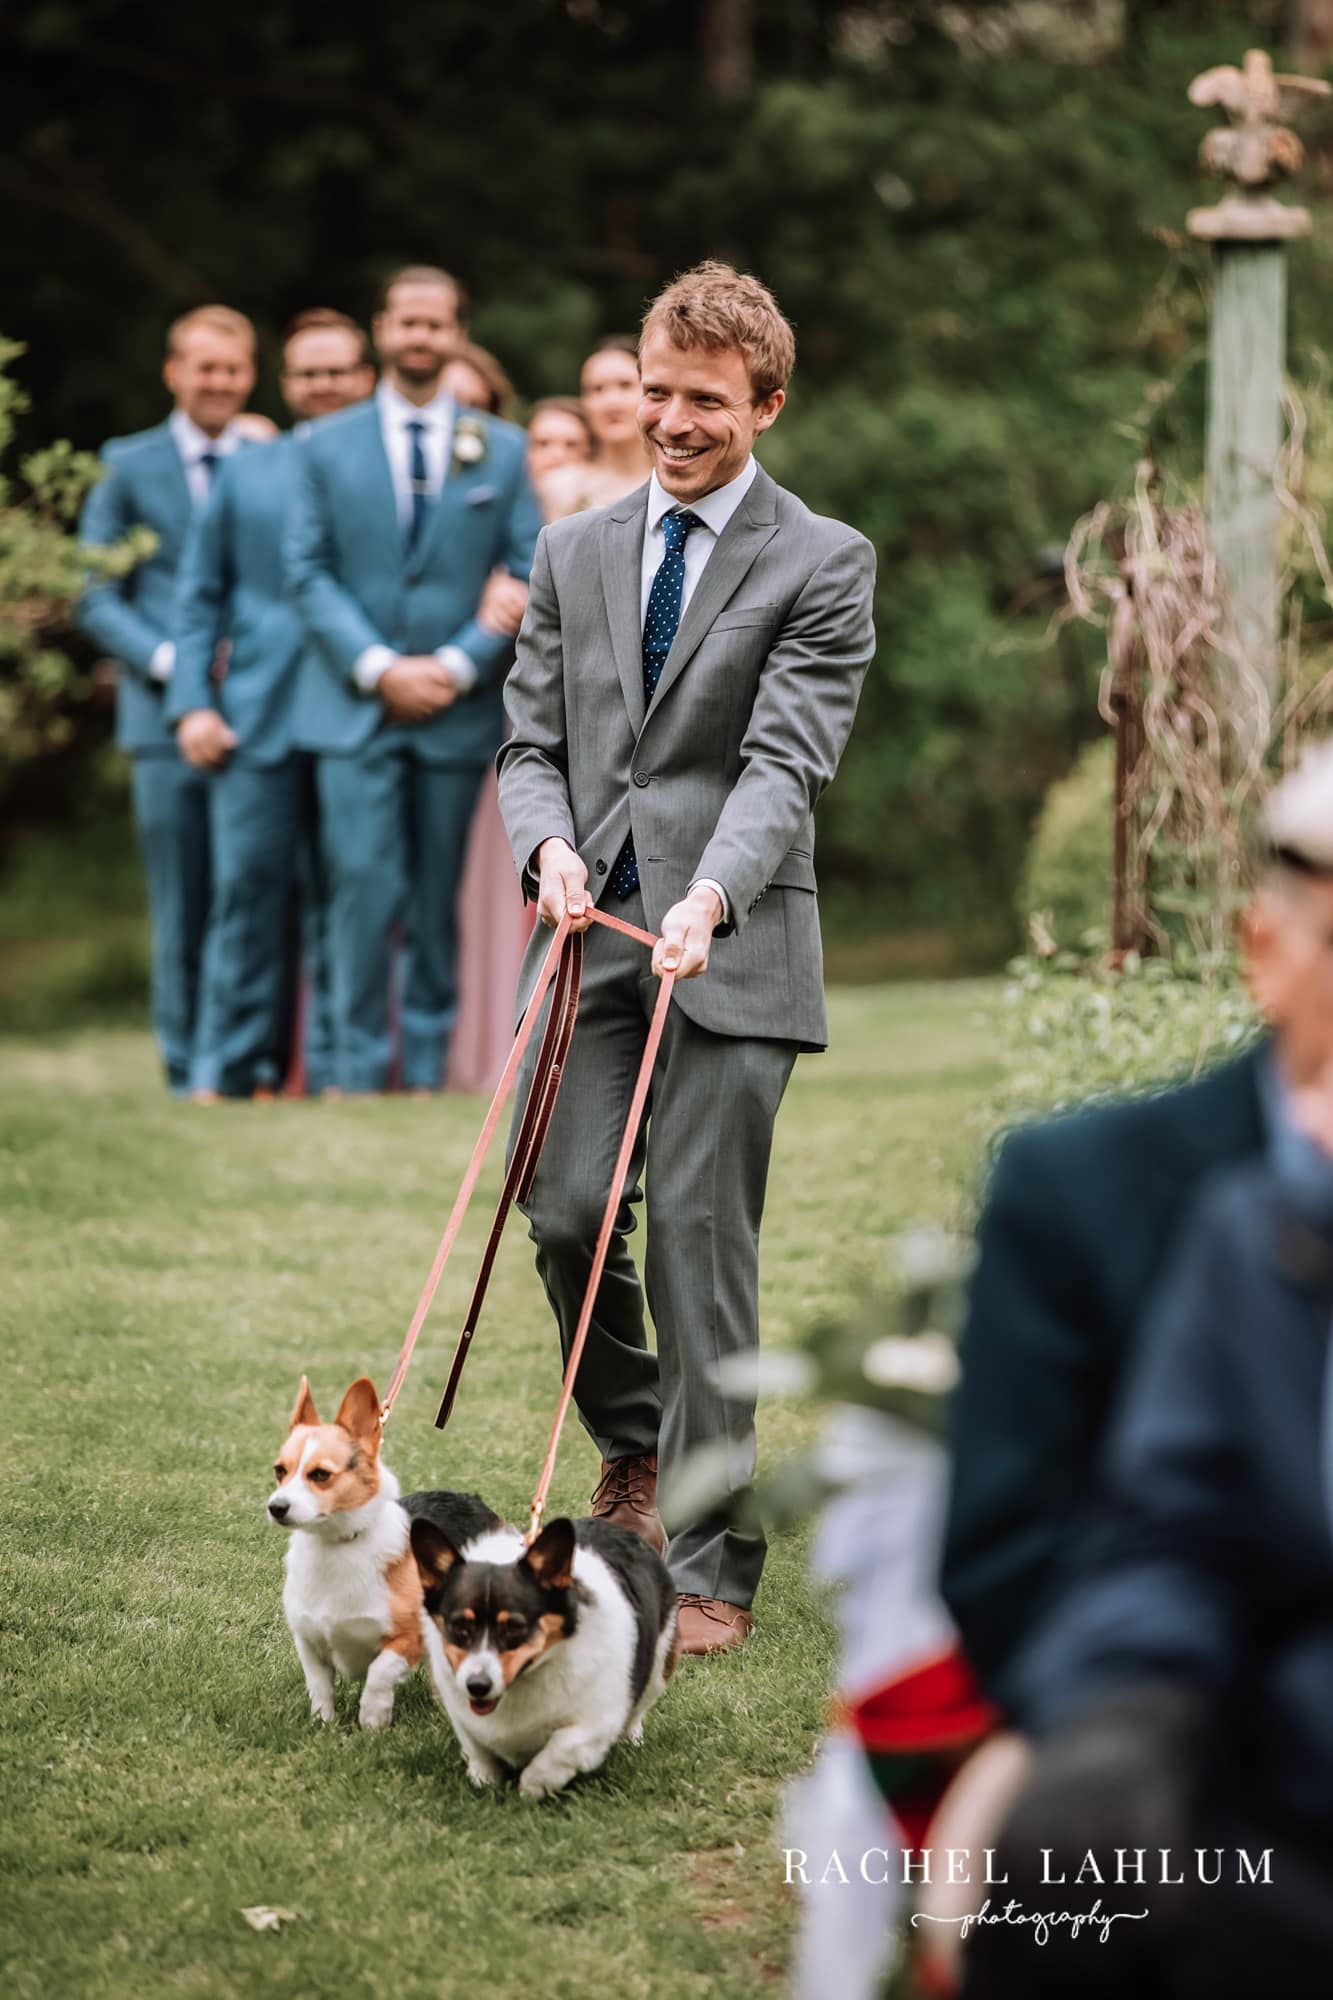 Member of the family walks two corgis down the aisle during wedding ceremony at Camrose Hill Flower Farm.